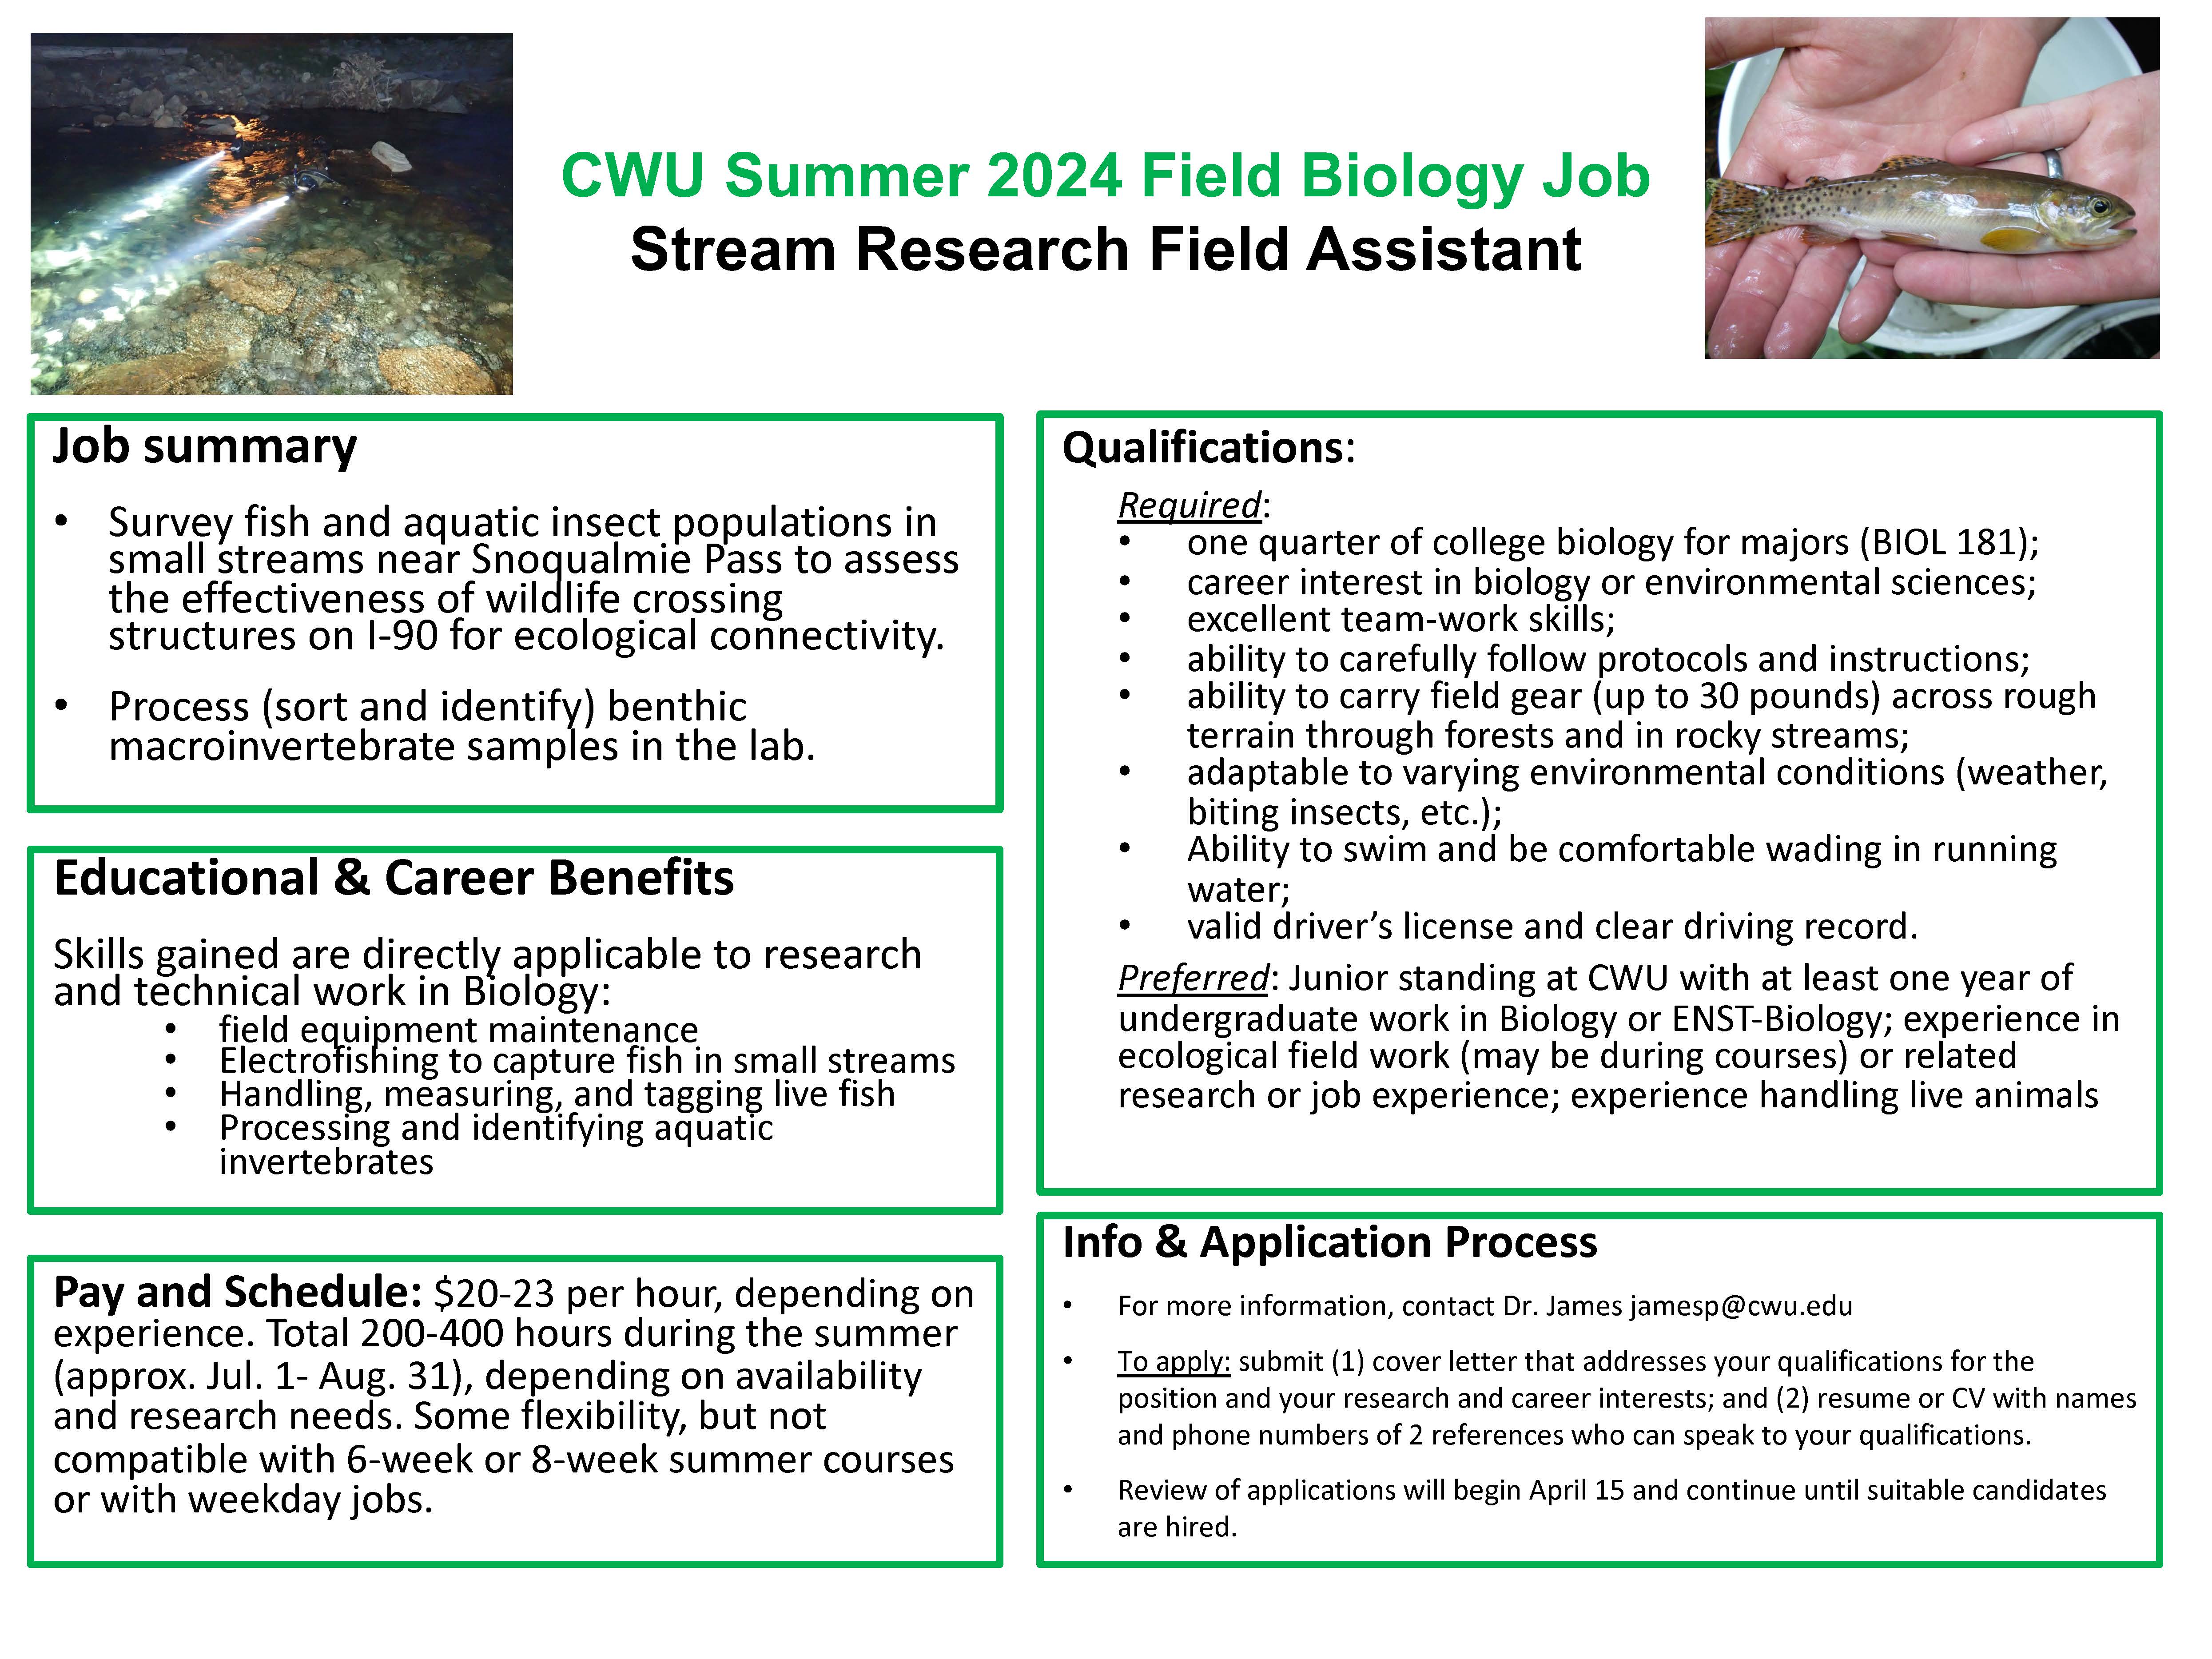 Poster announcing summer job opportunity in stream research for i-90 project